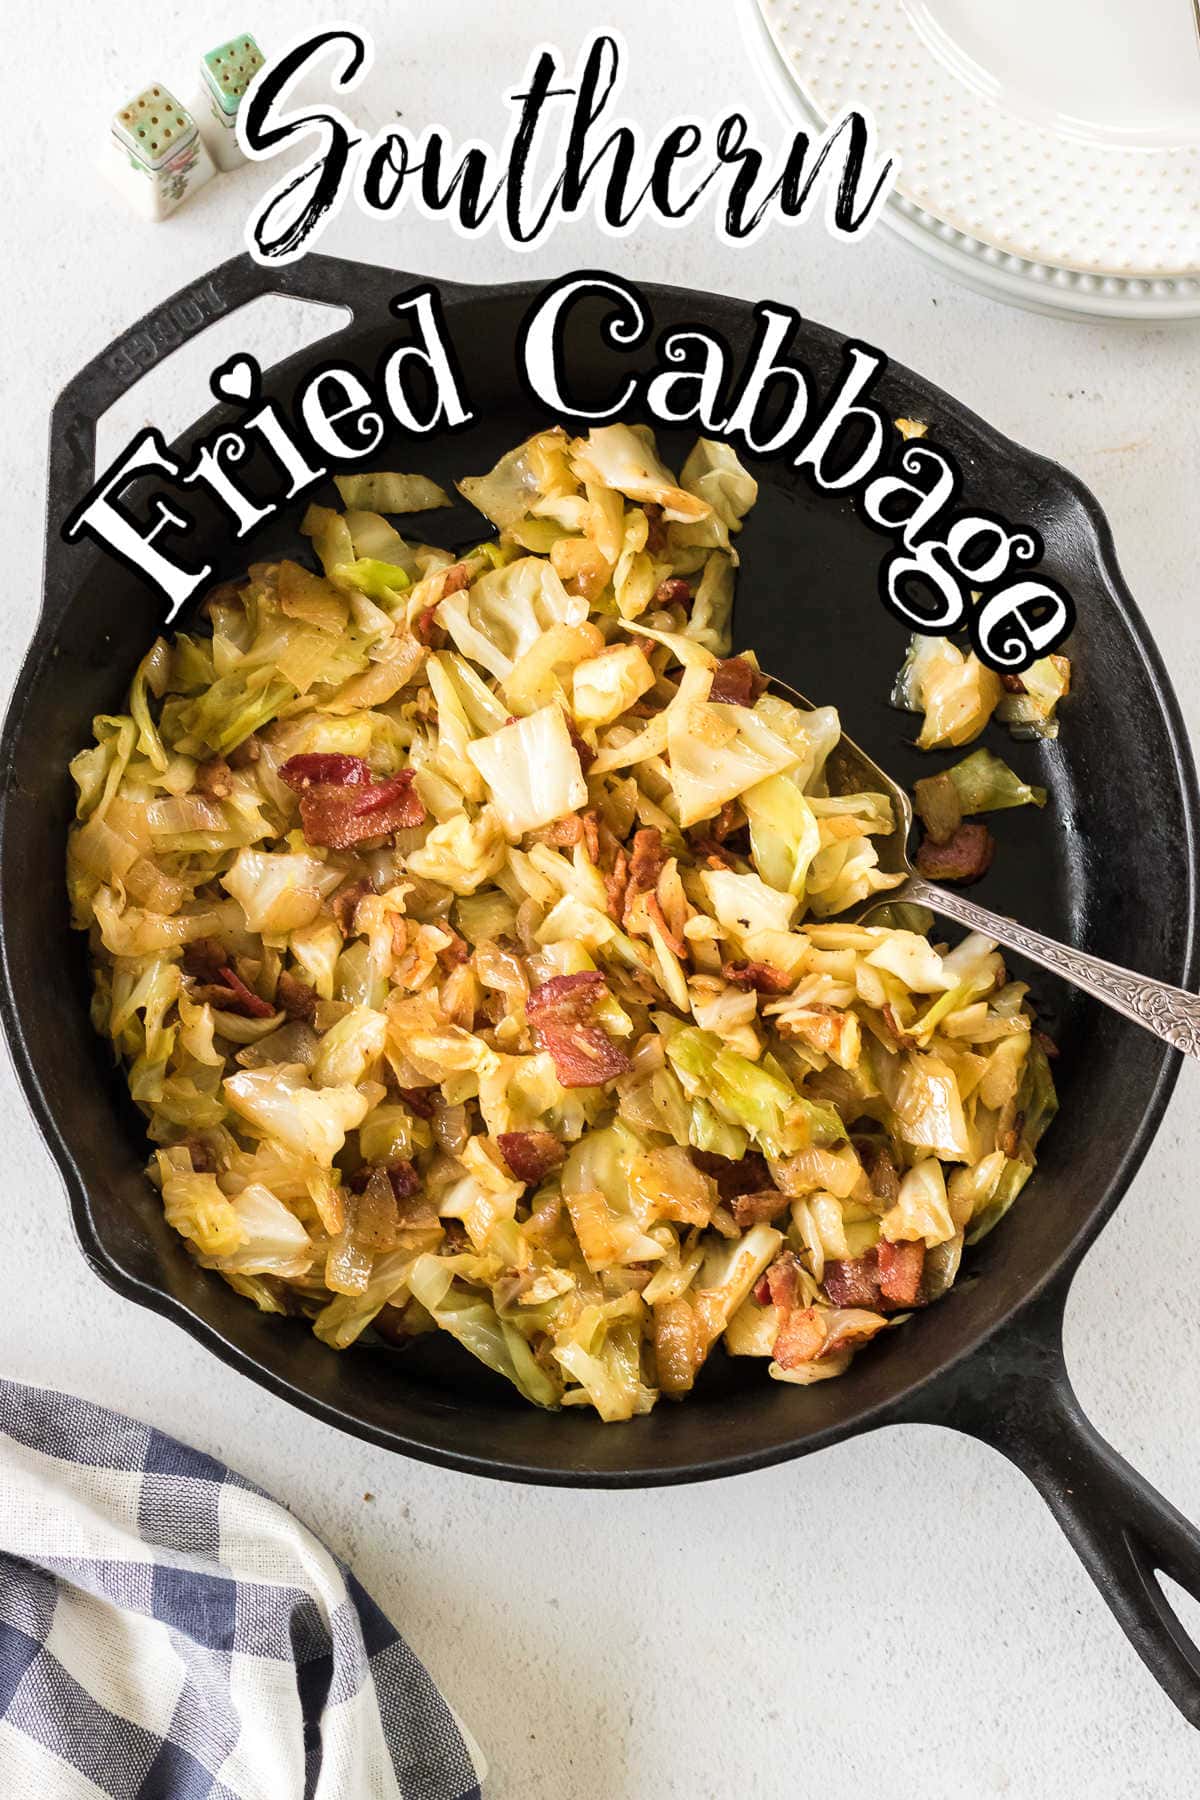 Overhead view of fried cabbage in a skillet with title text overlay.